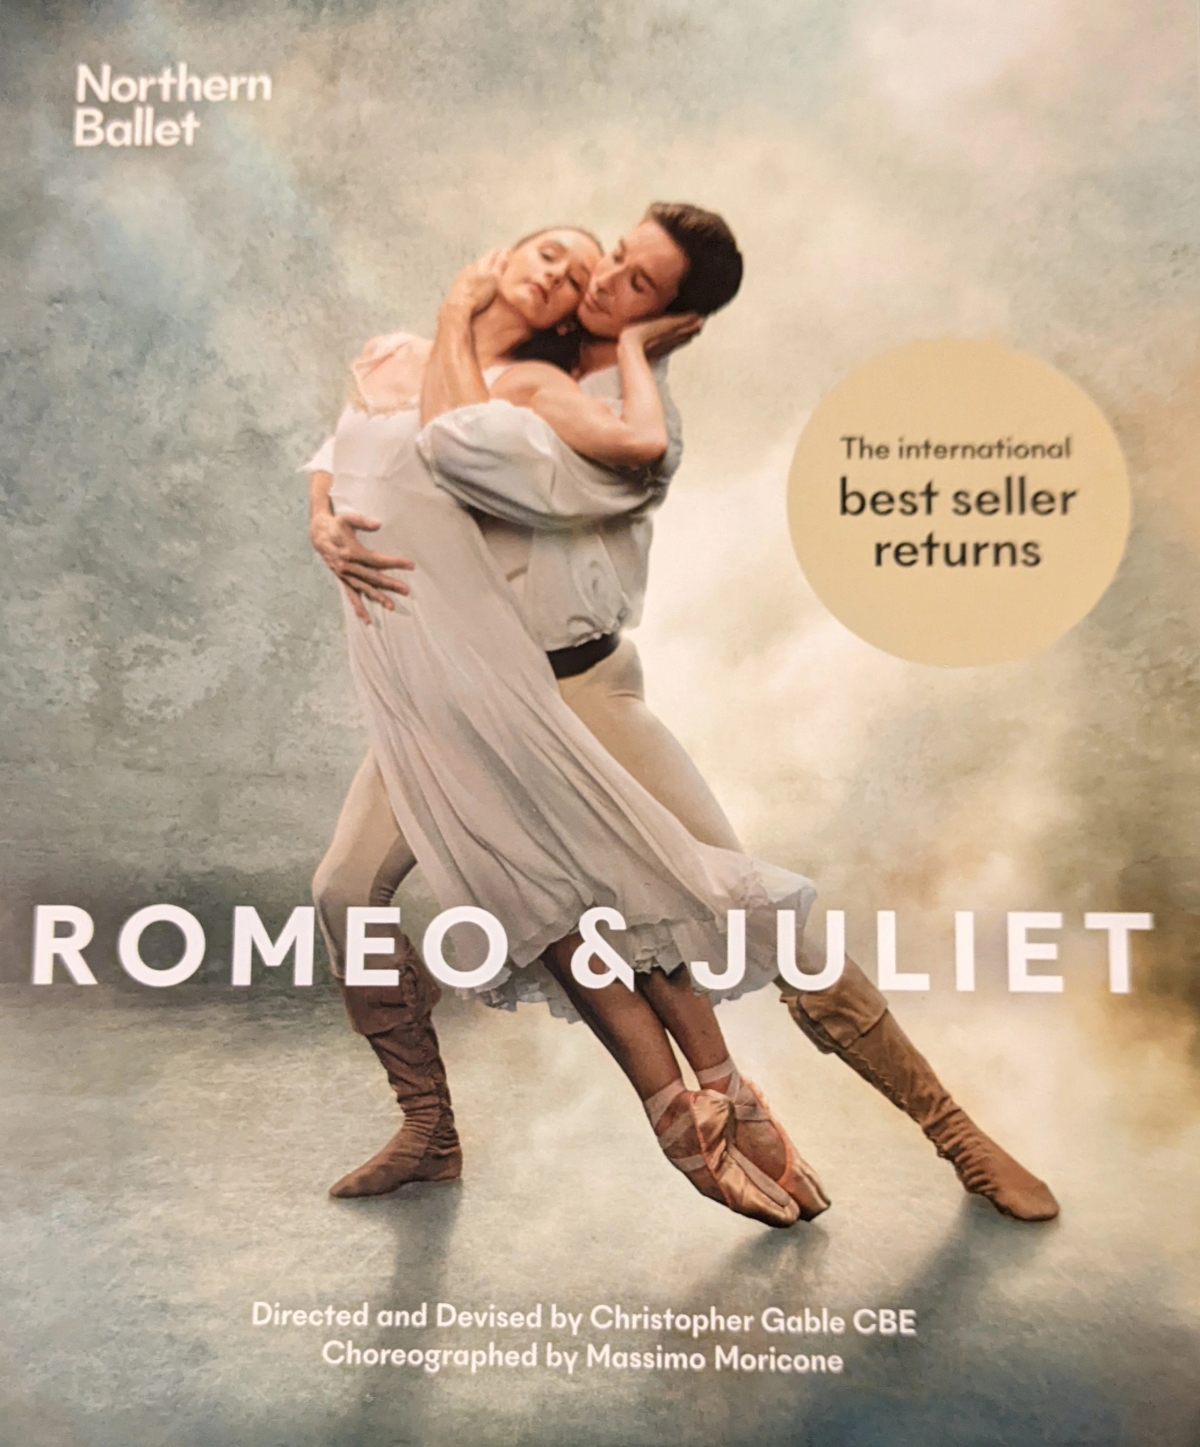 Northern Ballet – Romeo and Juliet at The Grand Theatre, Leeds.